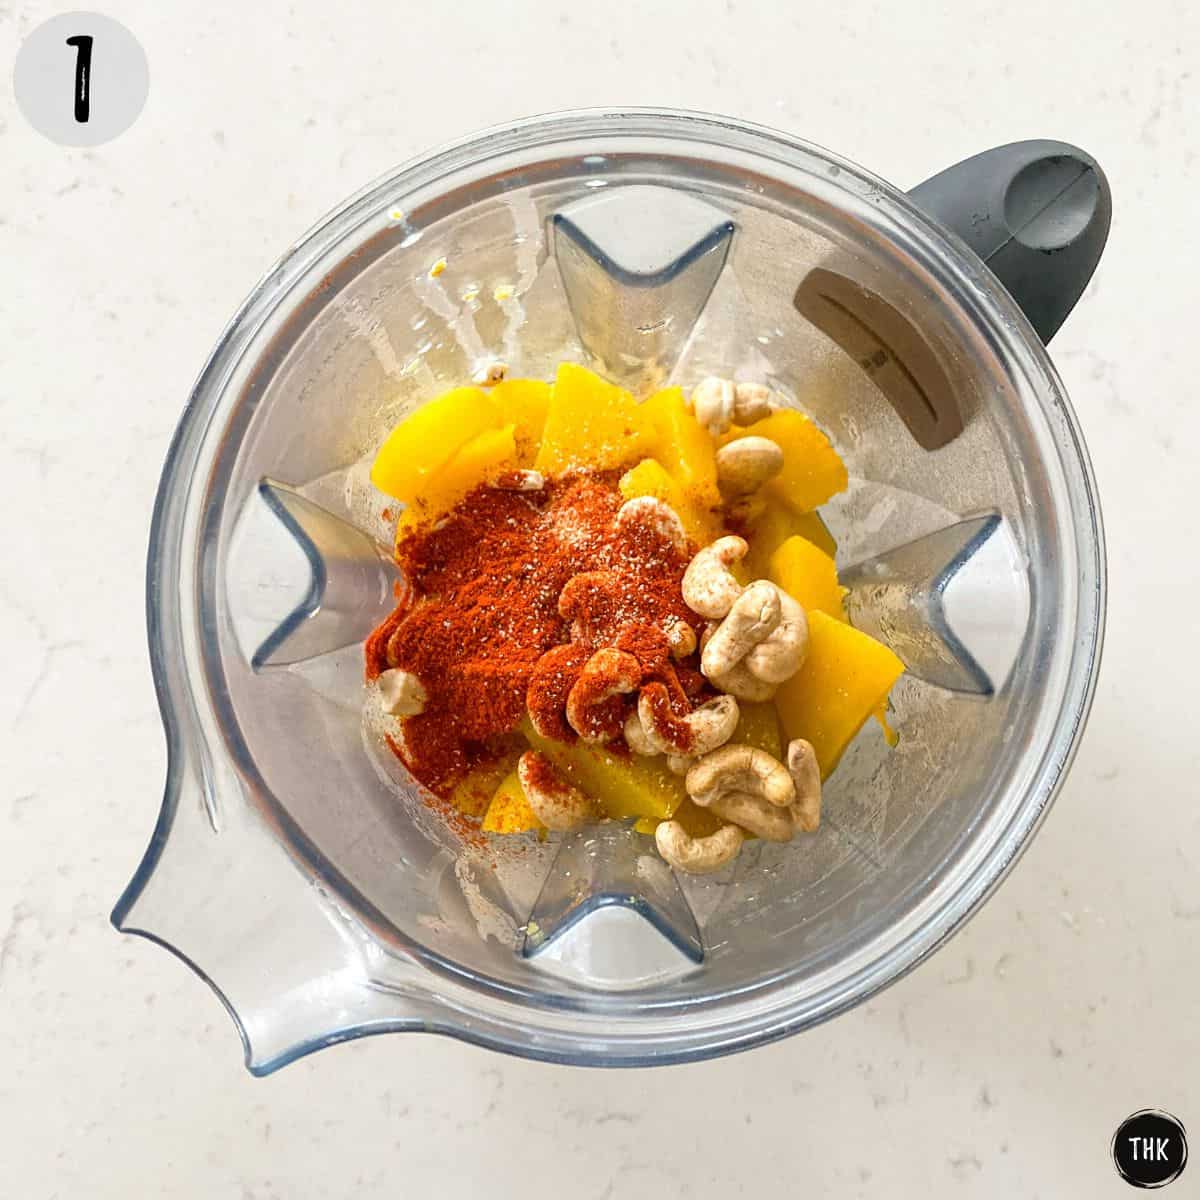 Blender with squash, cashews, and spices inside.